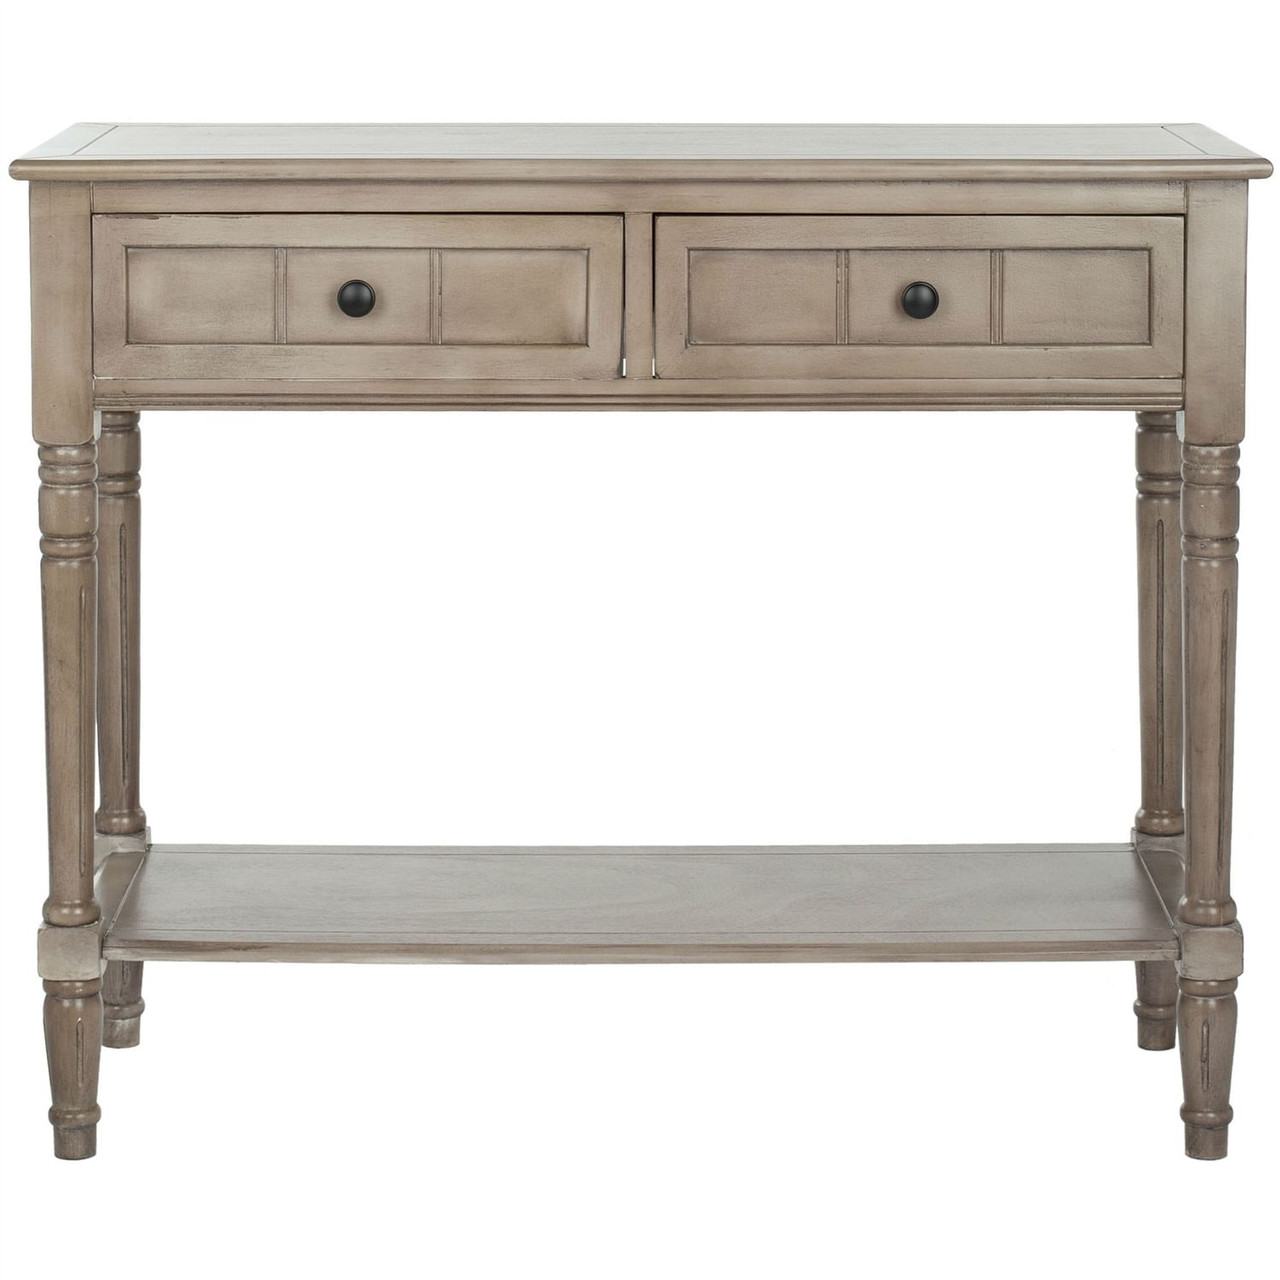 Console Accent Table Traditional Style Sofa Table in Distressed Cream